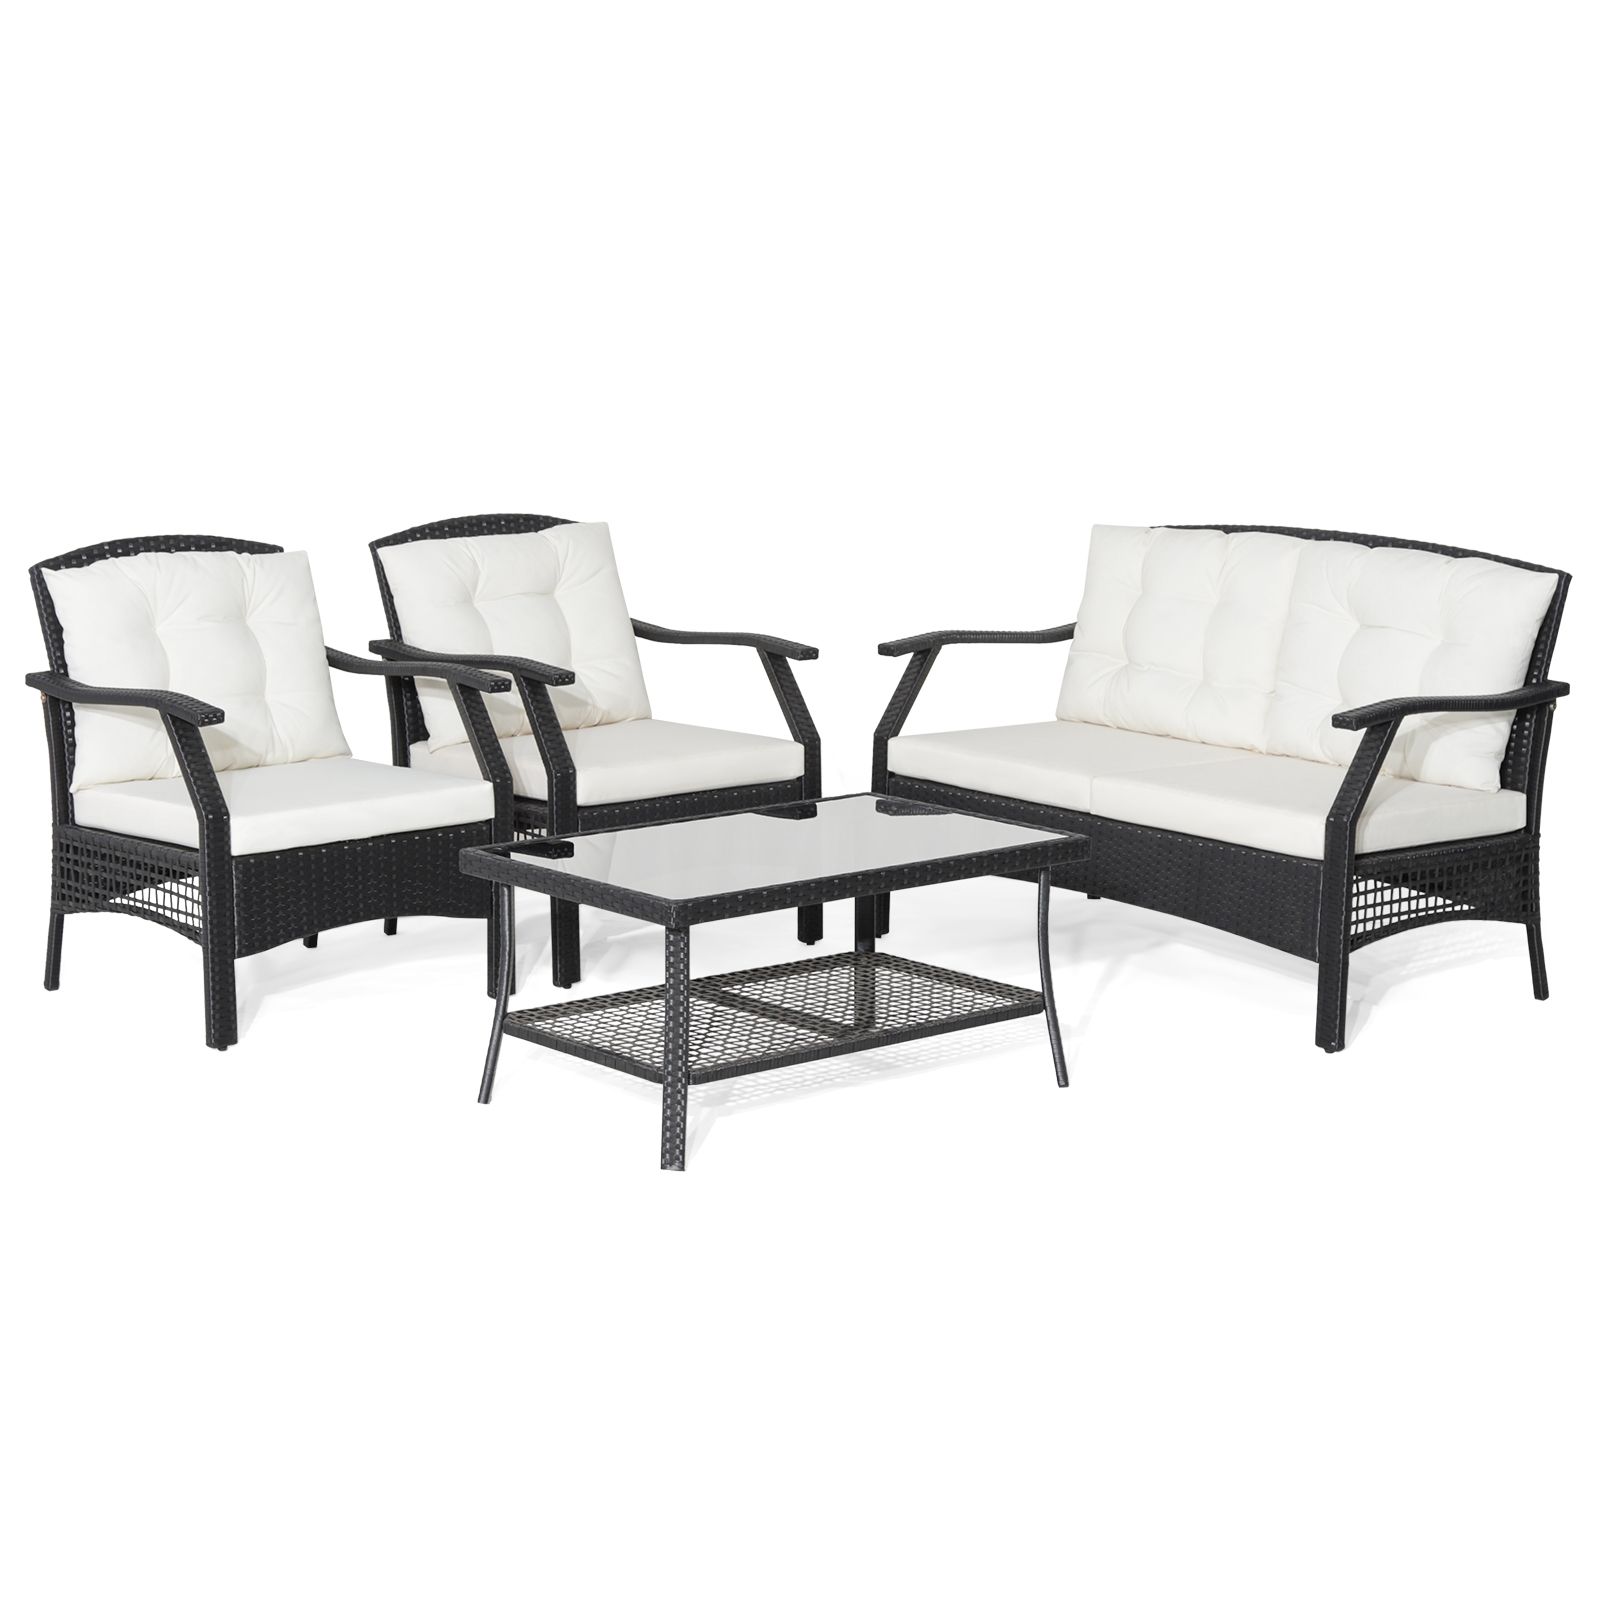 4 Pieces Patio Rattan Conversation Set with Coffee Table and Cushions